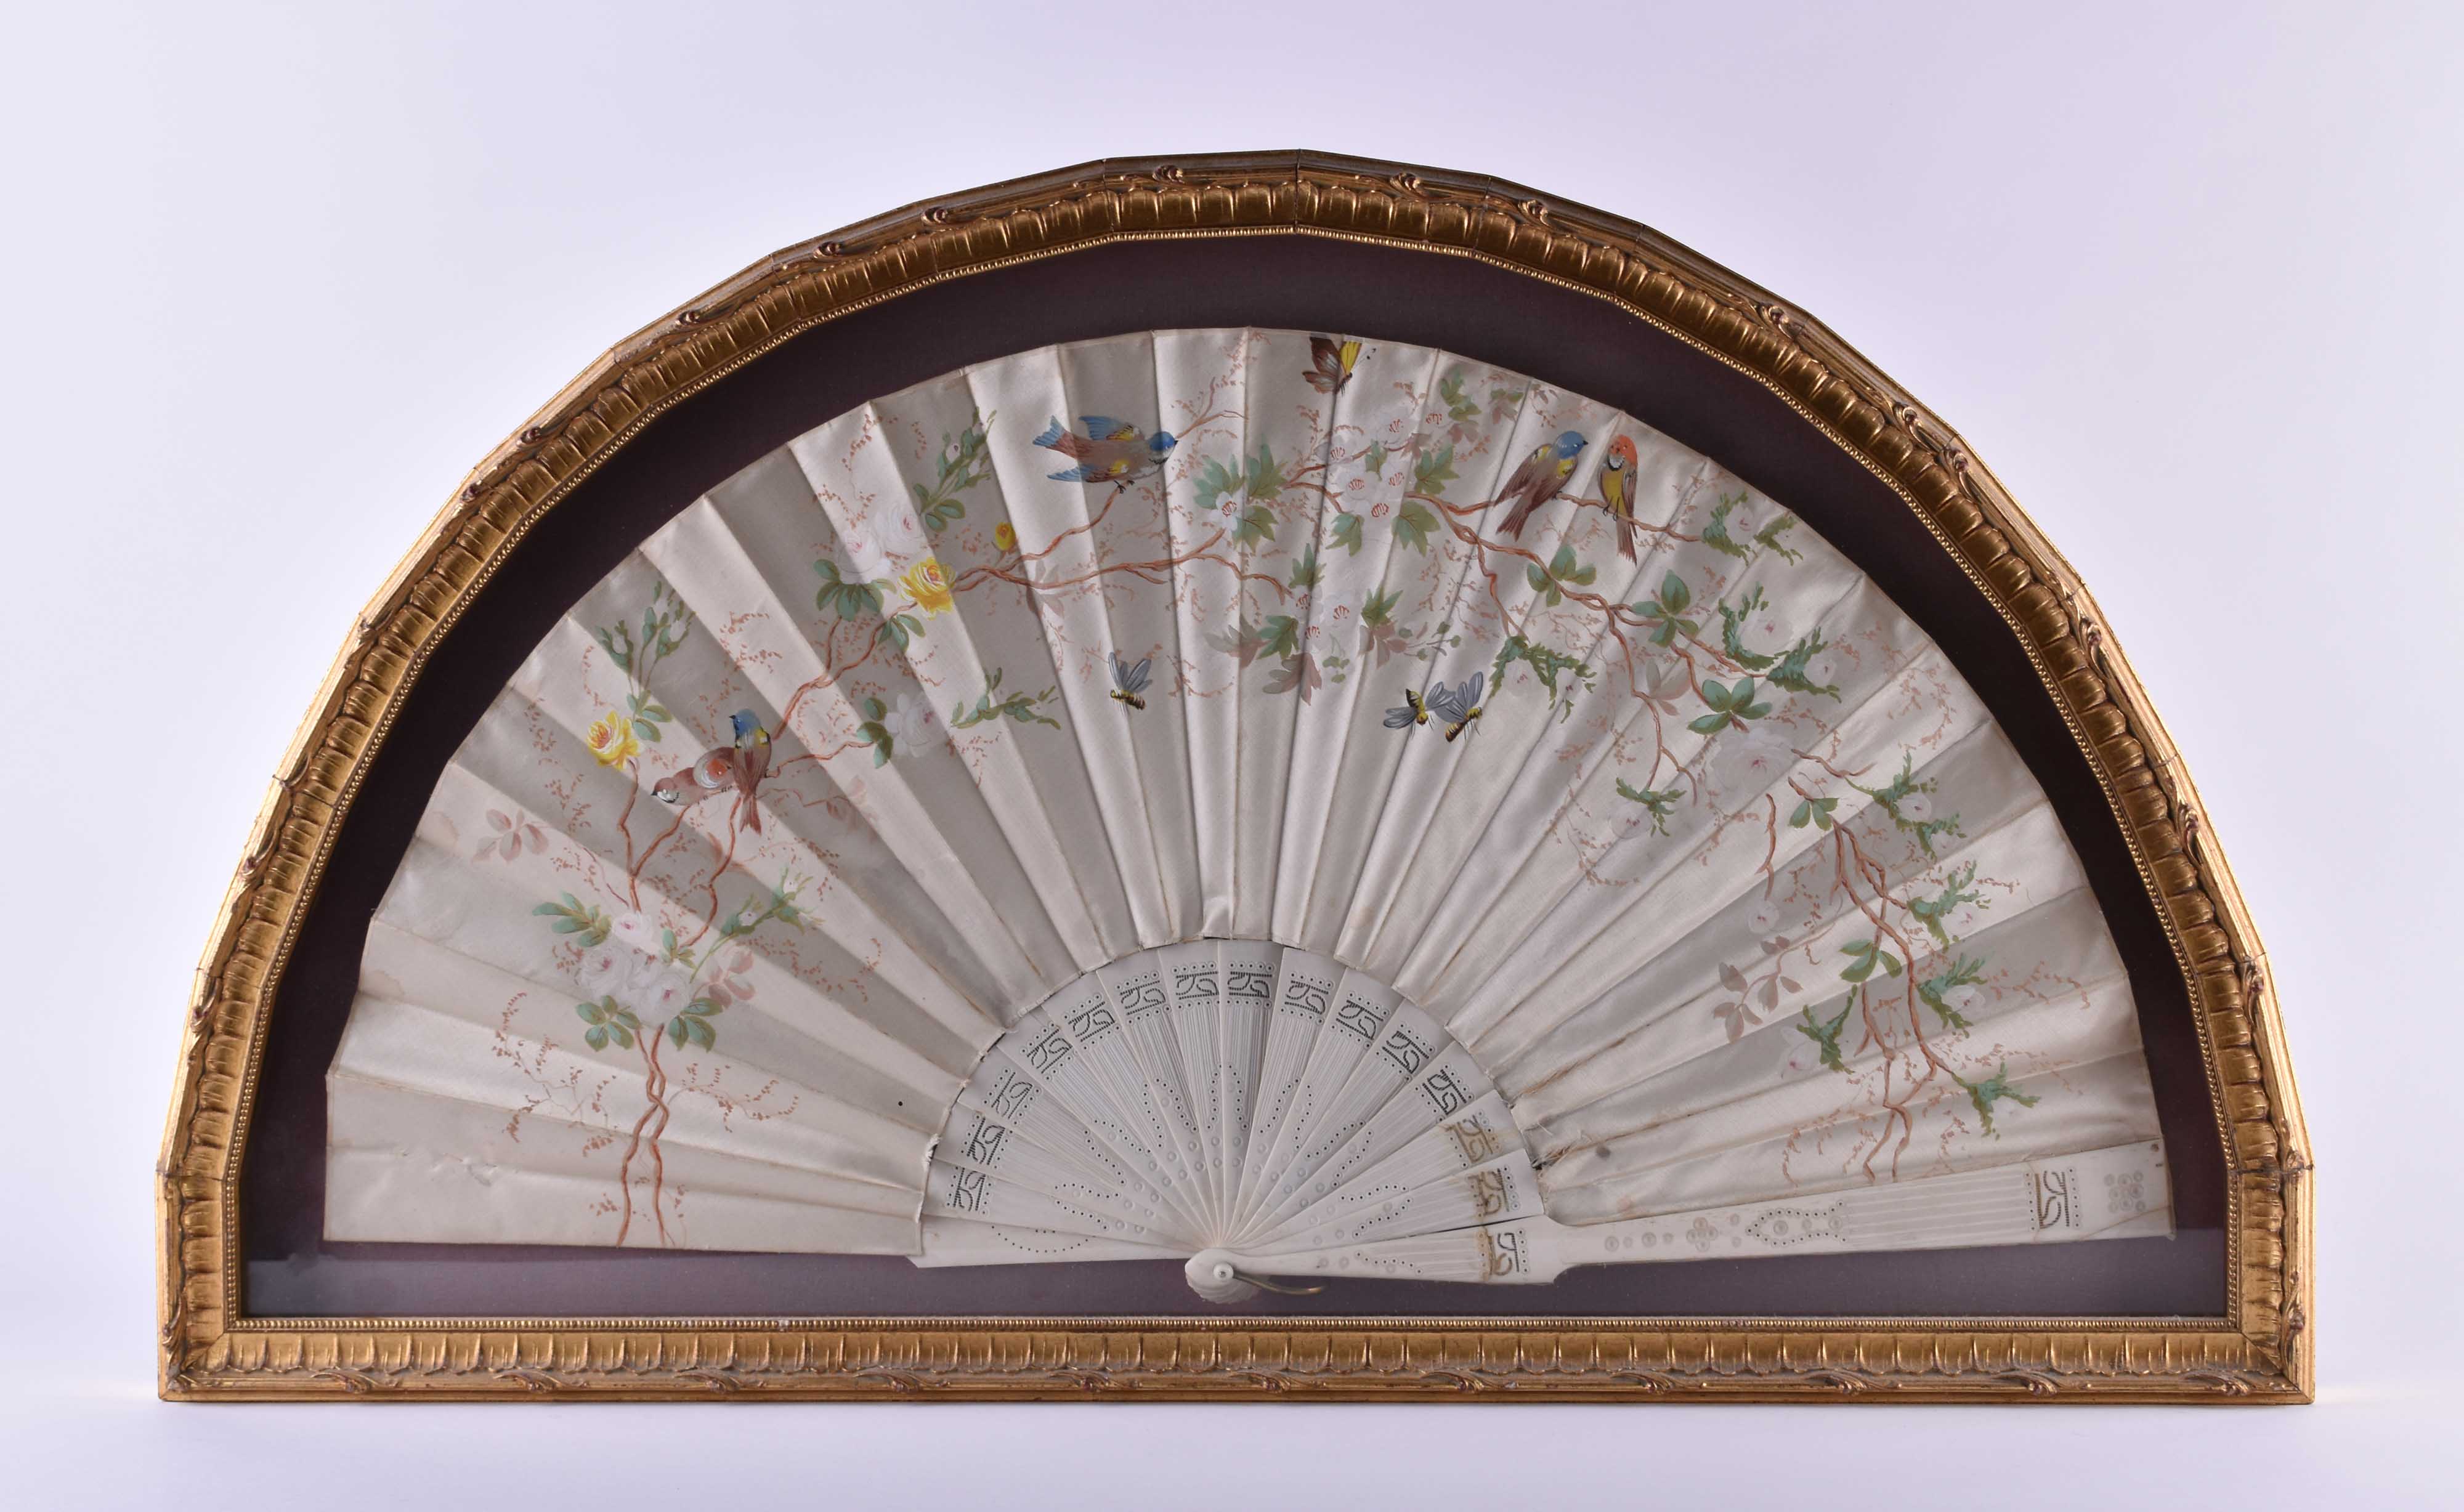 painted silk fan, probably France around 1800